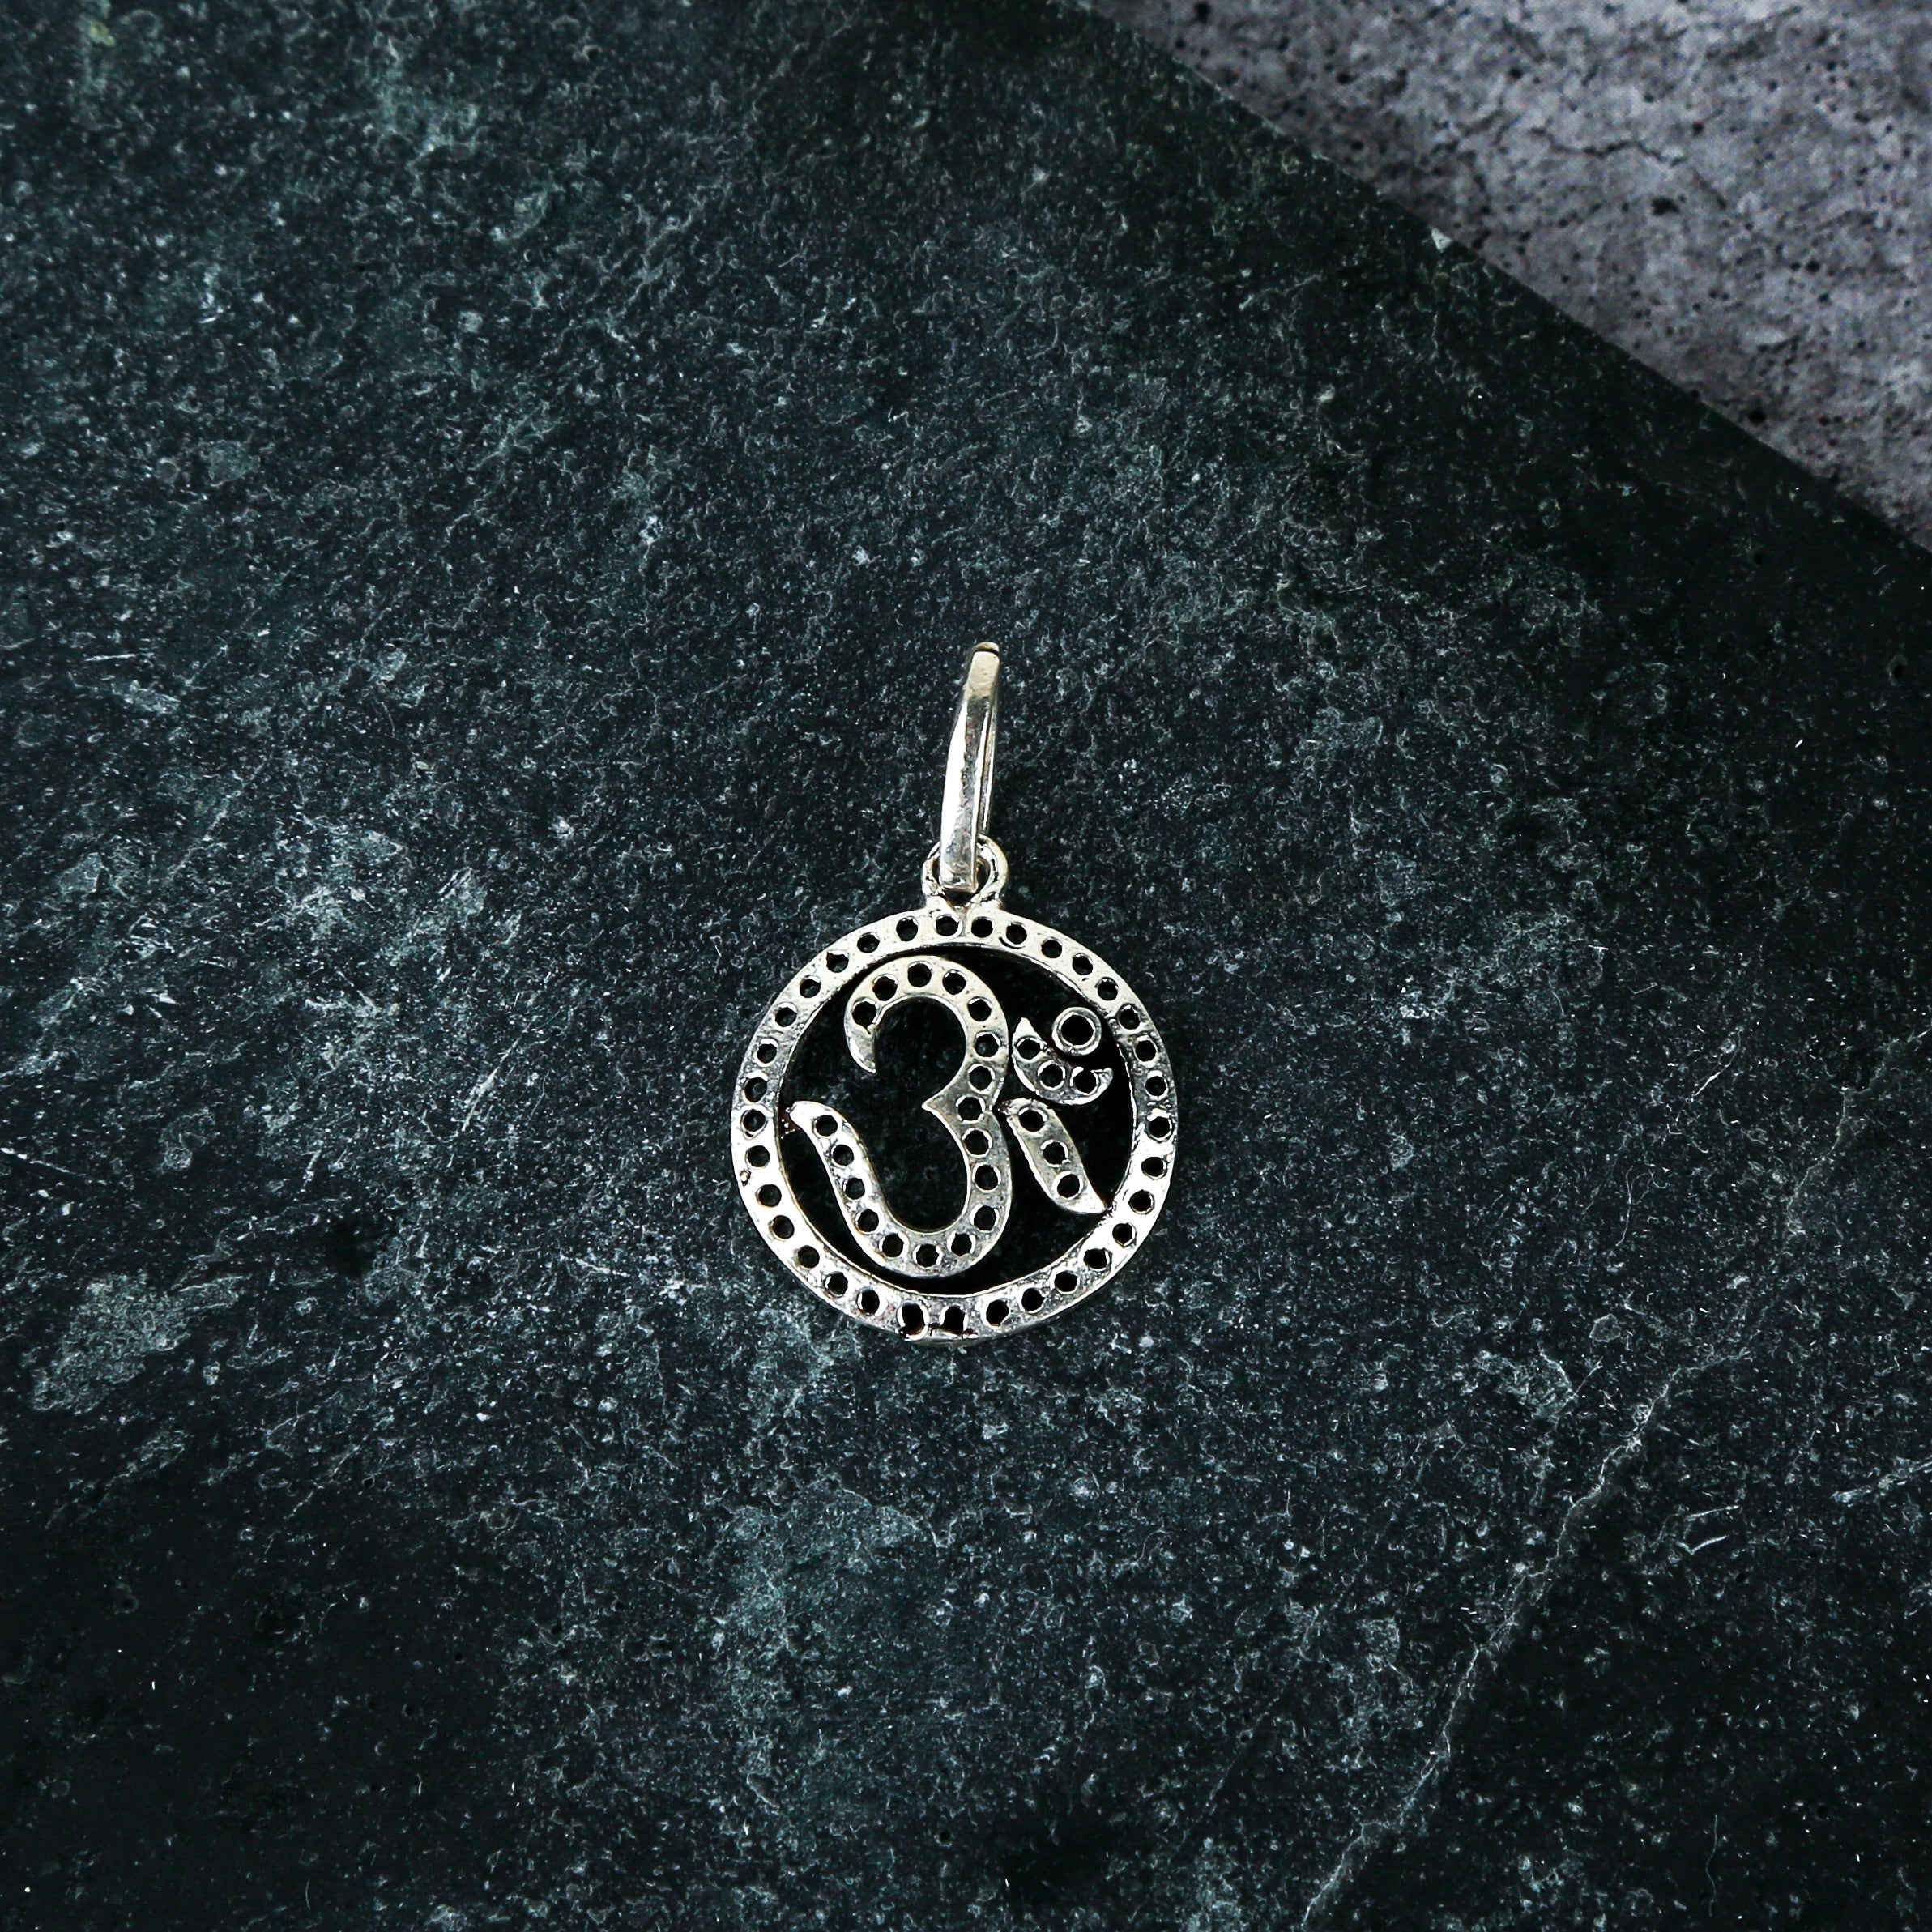 The Dotted Om Pendant